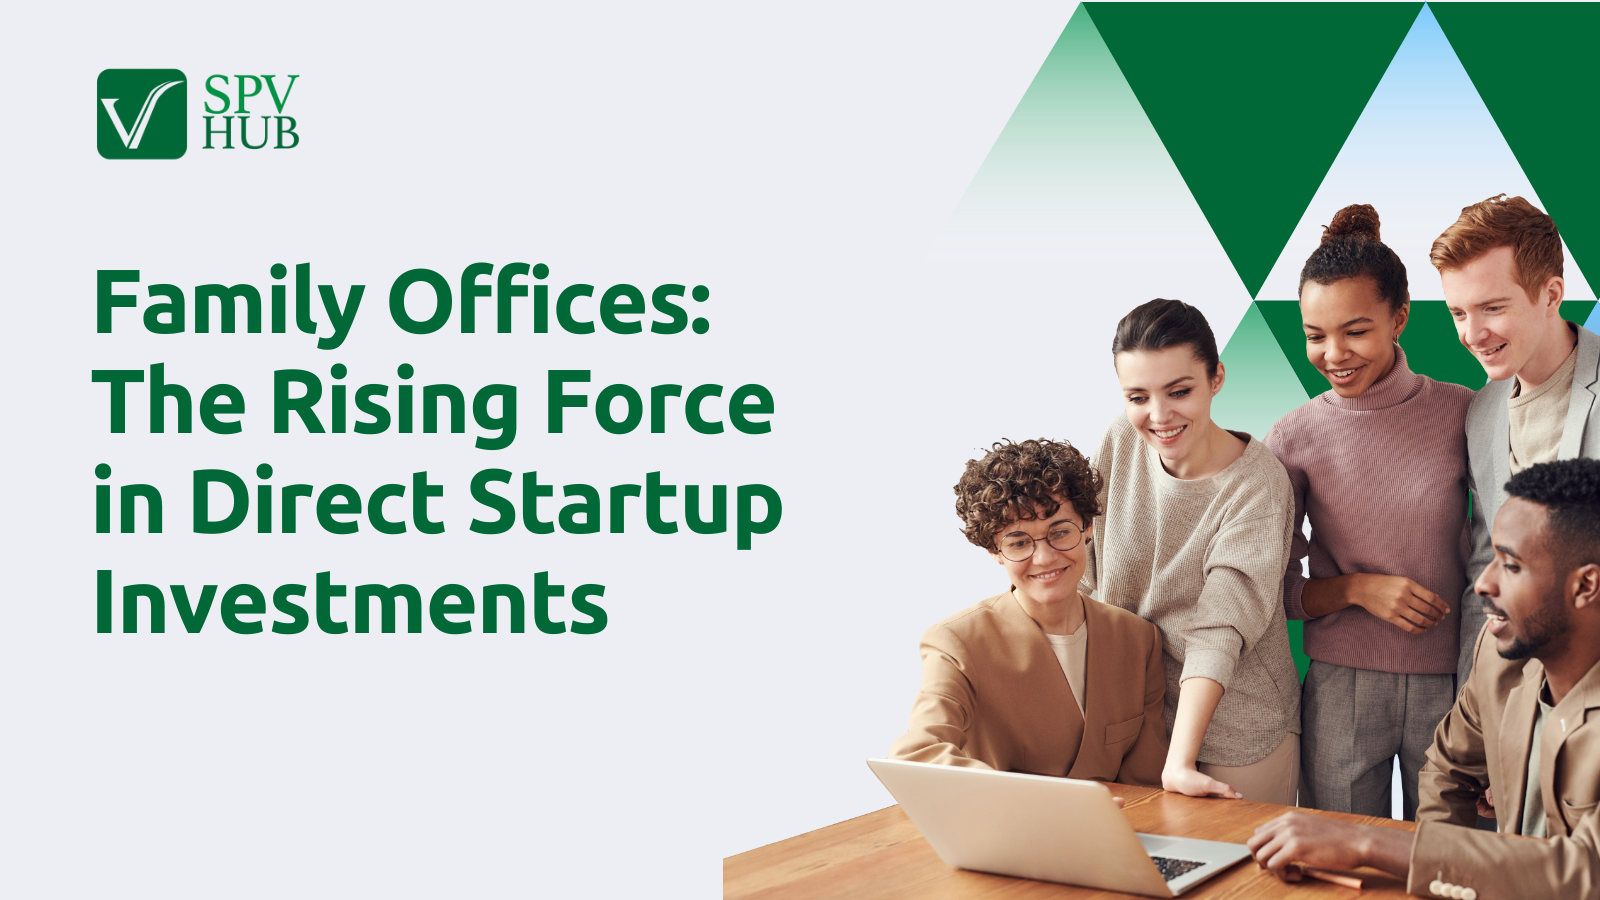 Family Offices: The Rising Force in Direct Startup Investments